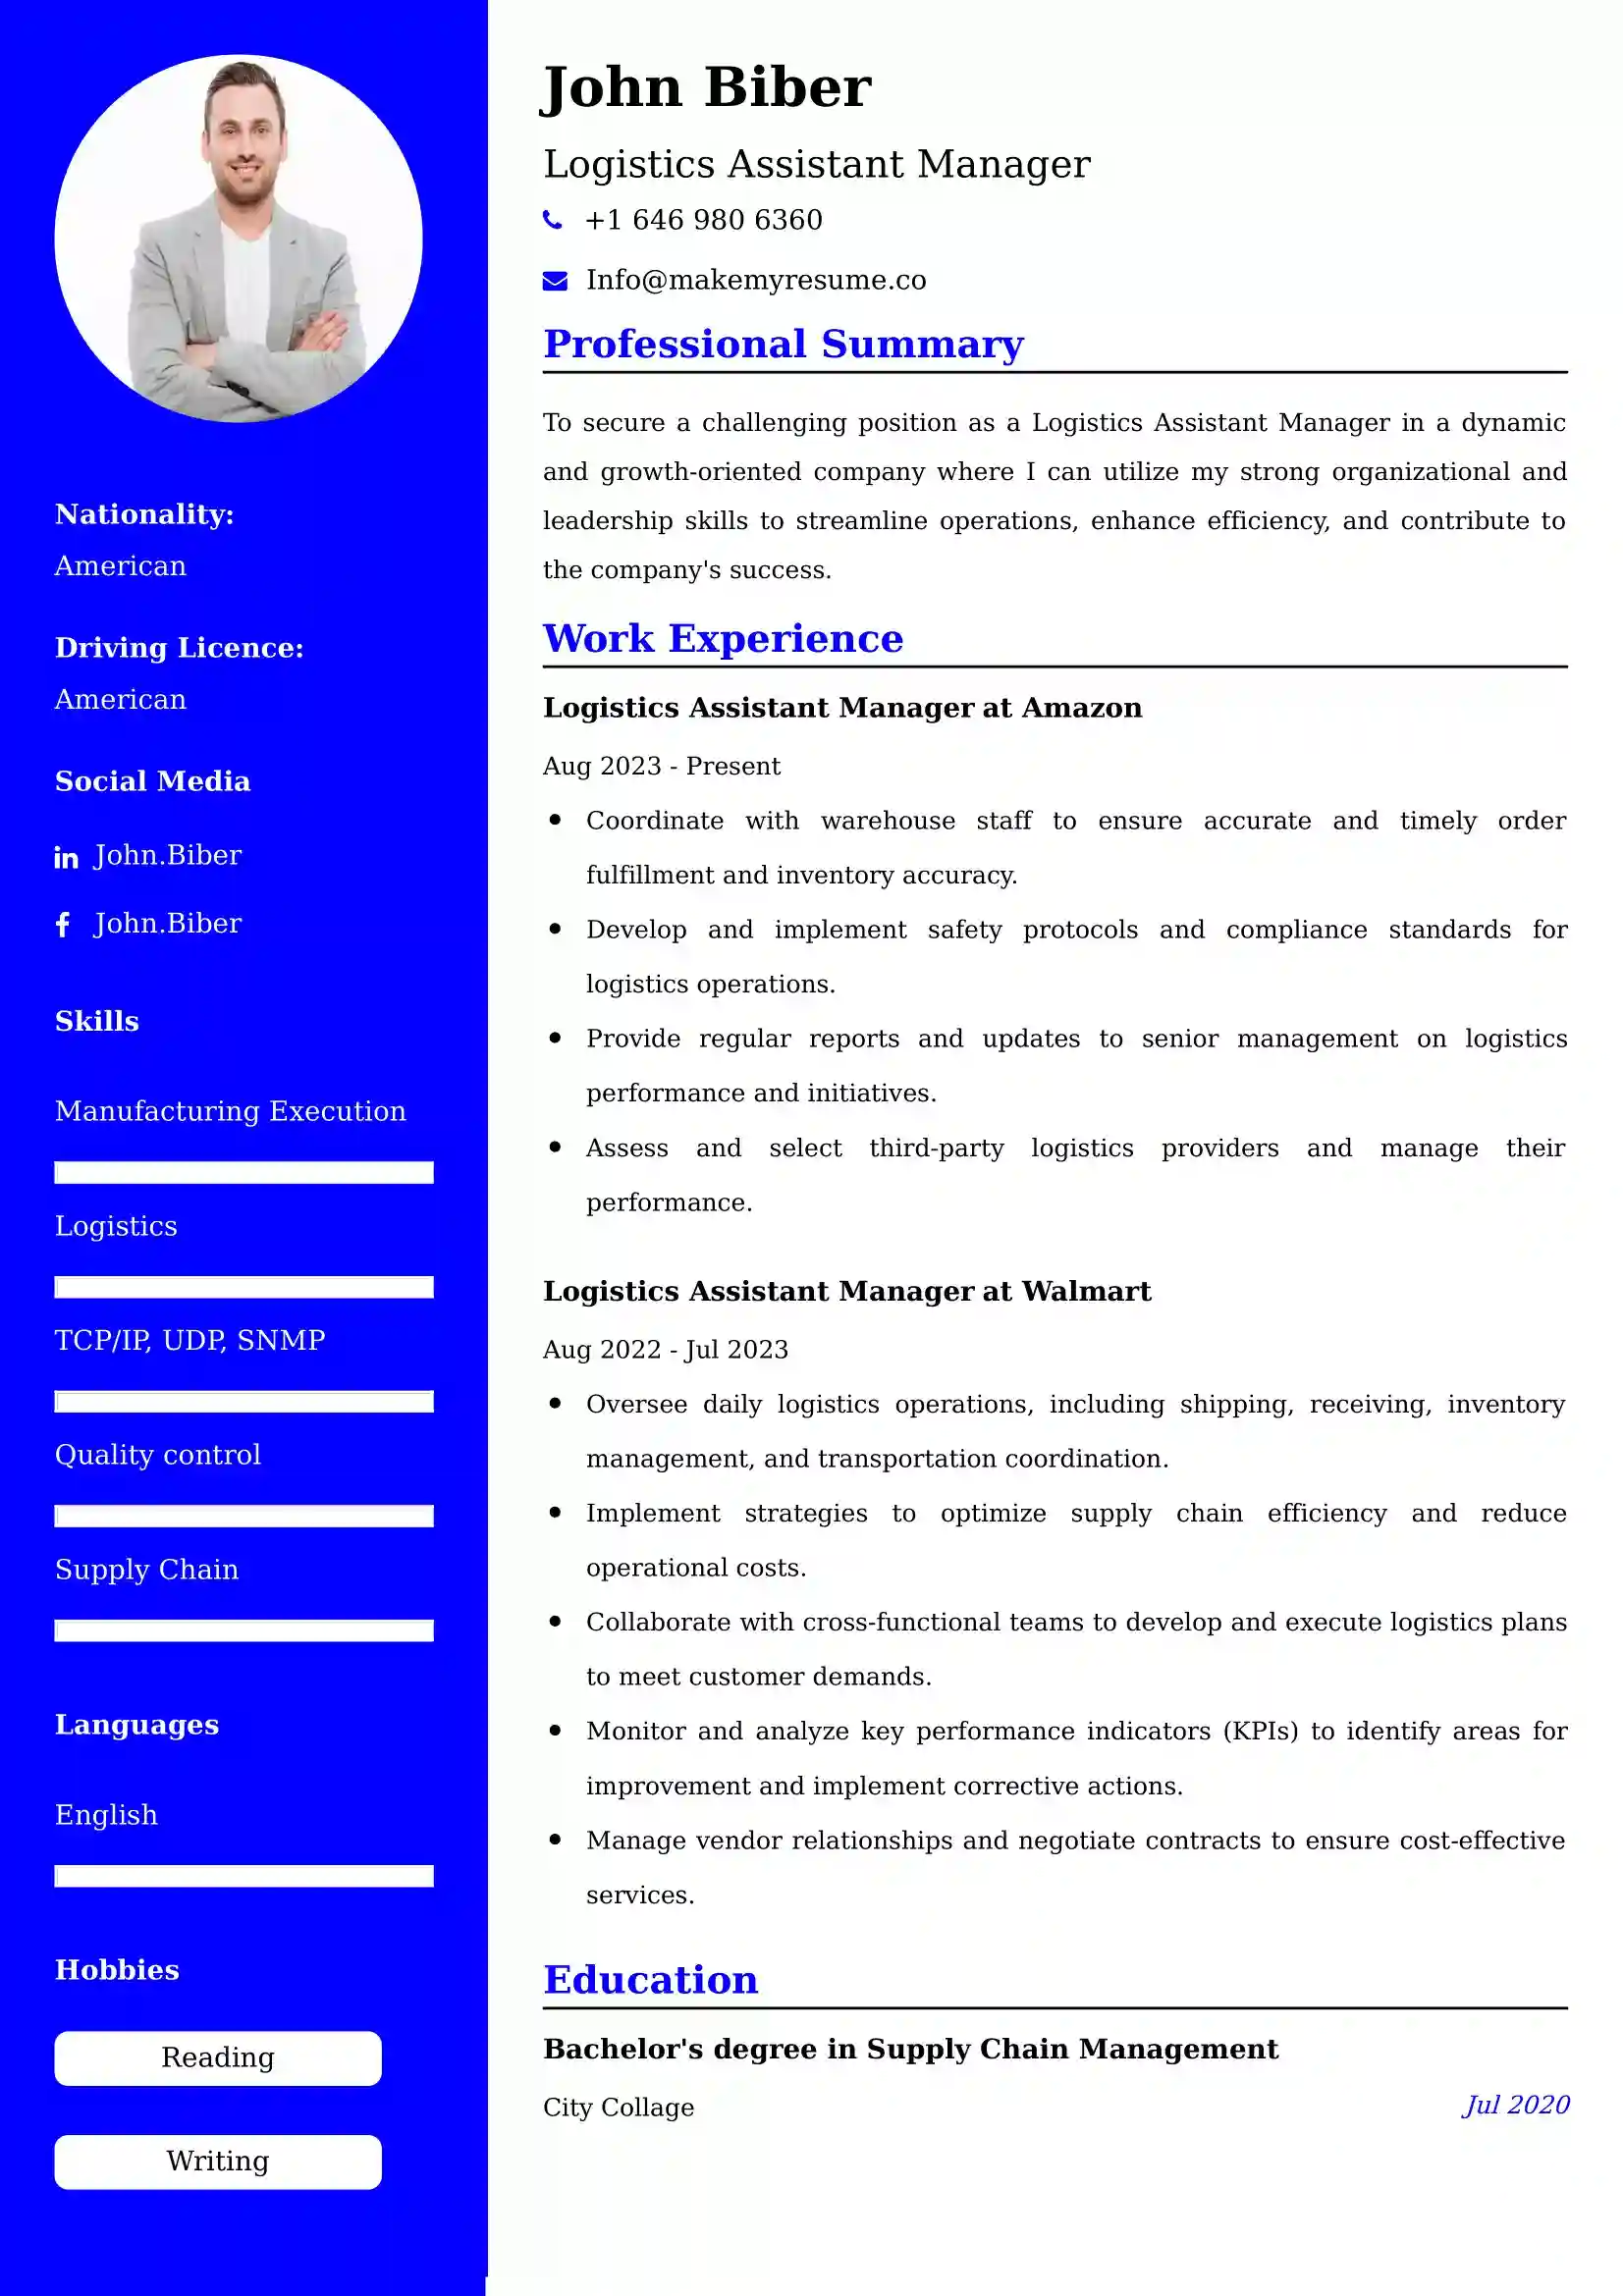 Logistics Assistant Manager Resume Examples for UK Jobs - Tips and Guide